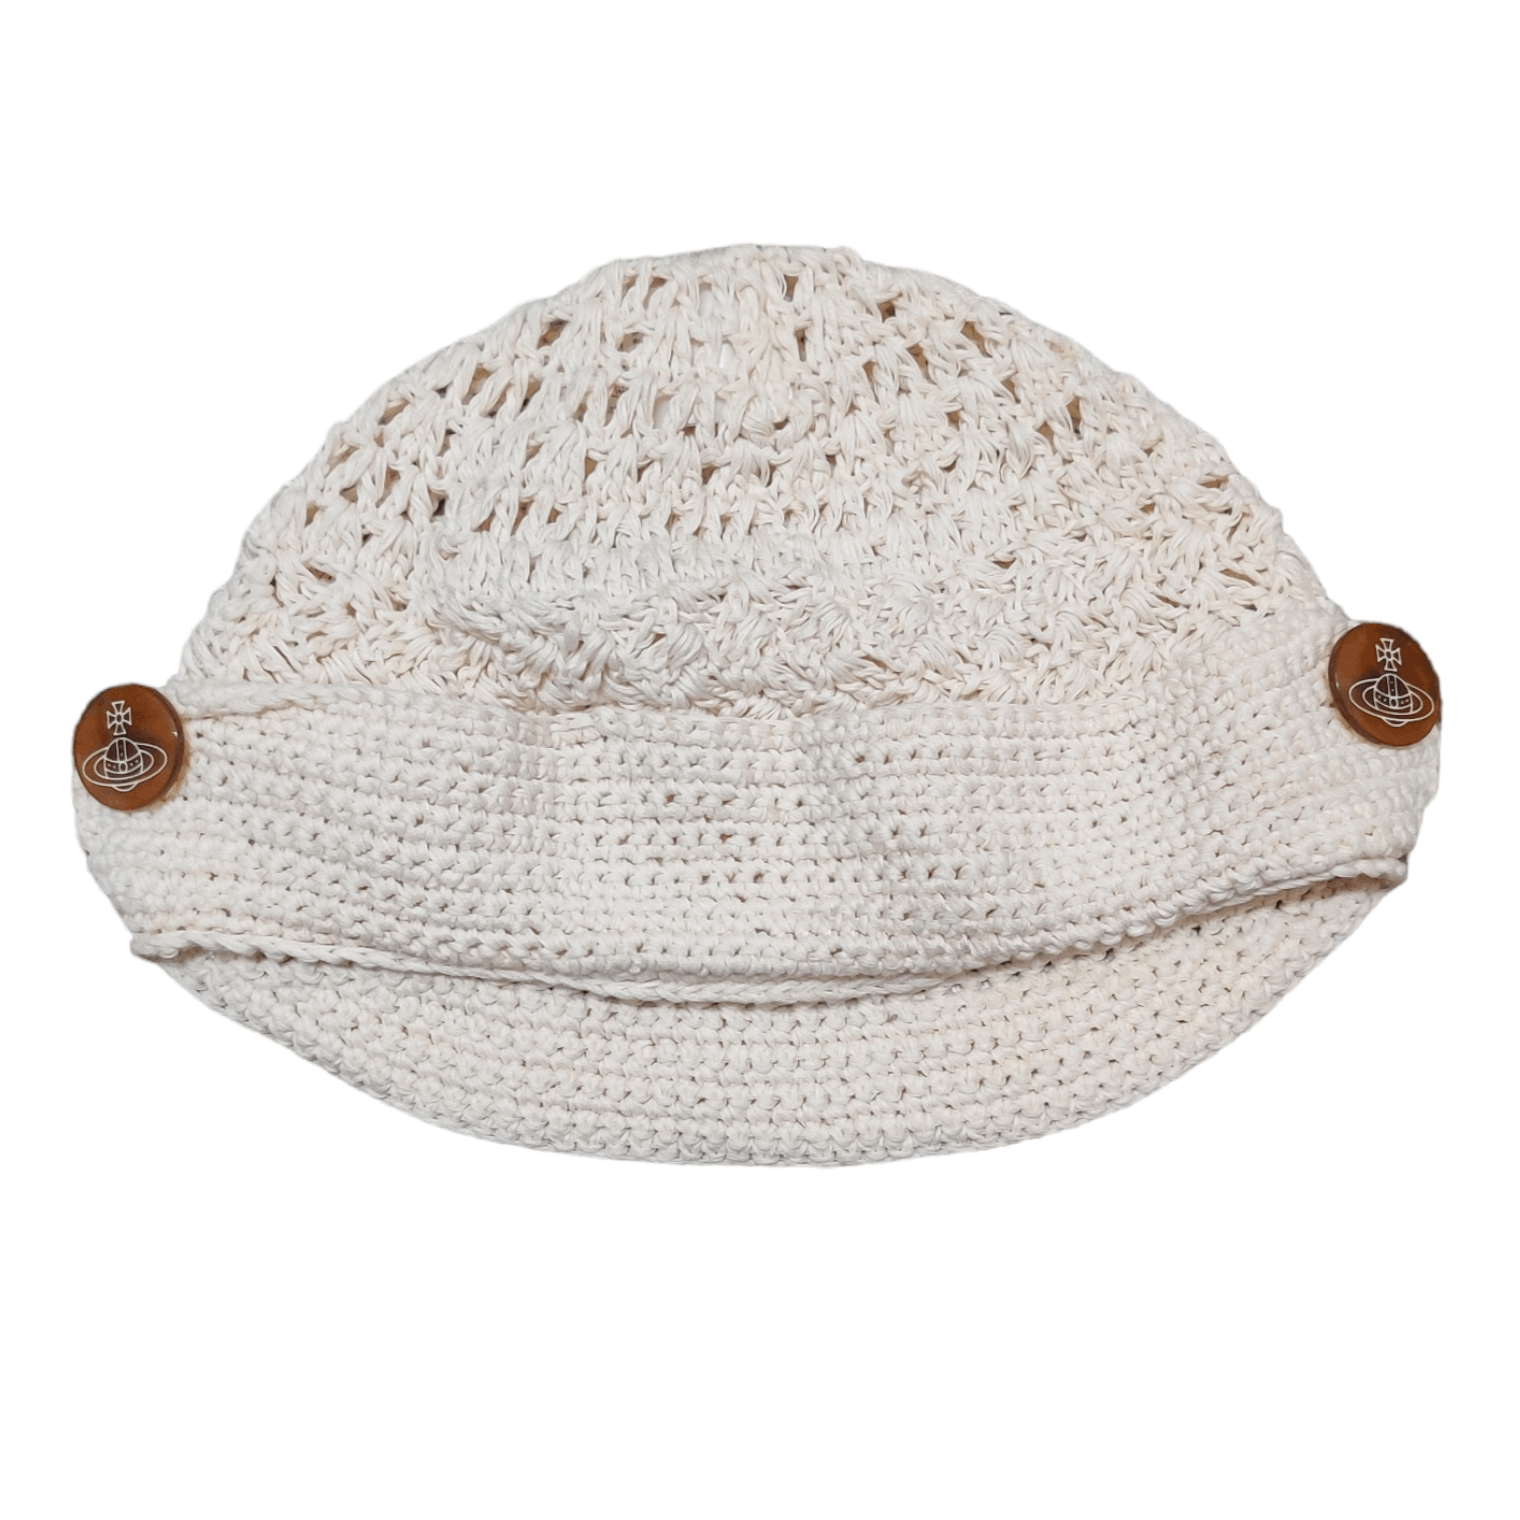 Vivienne Westwood Knitted Hat - 6